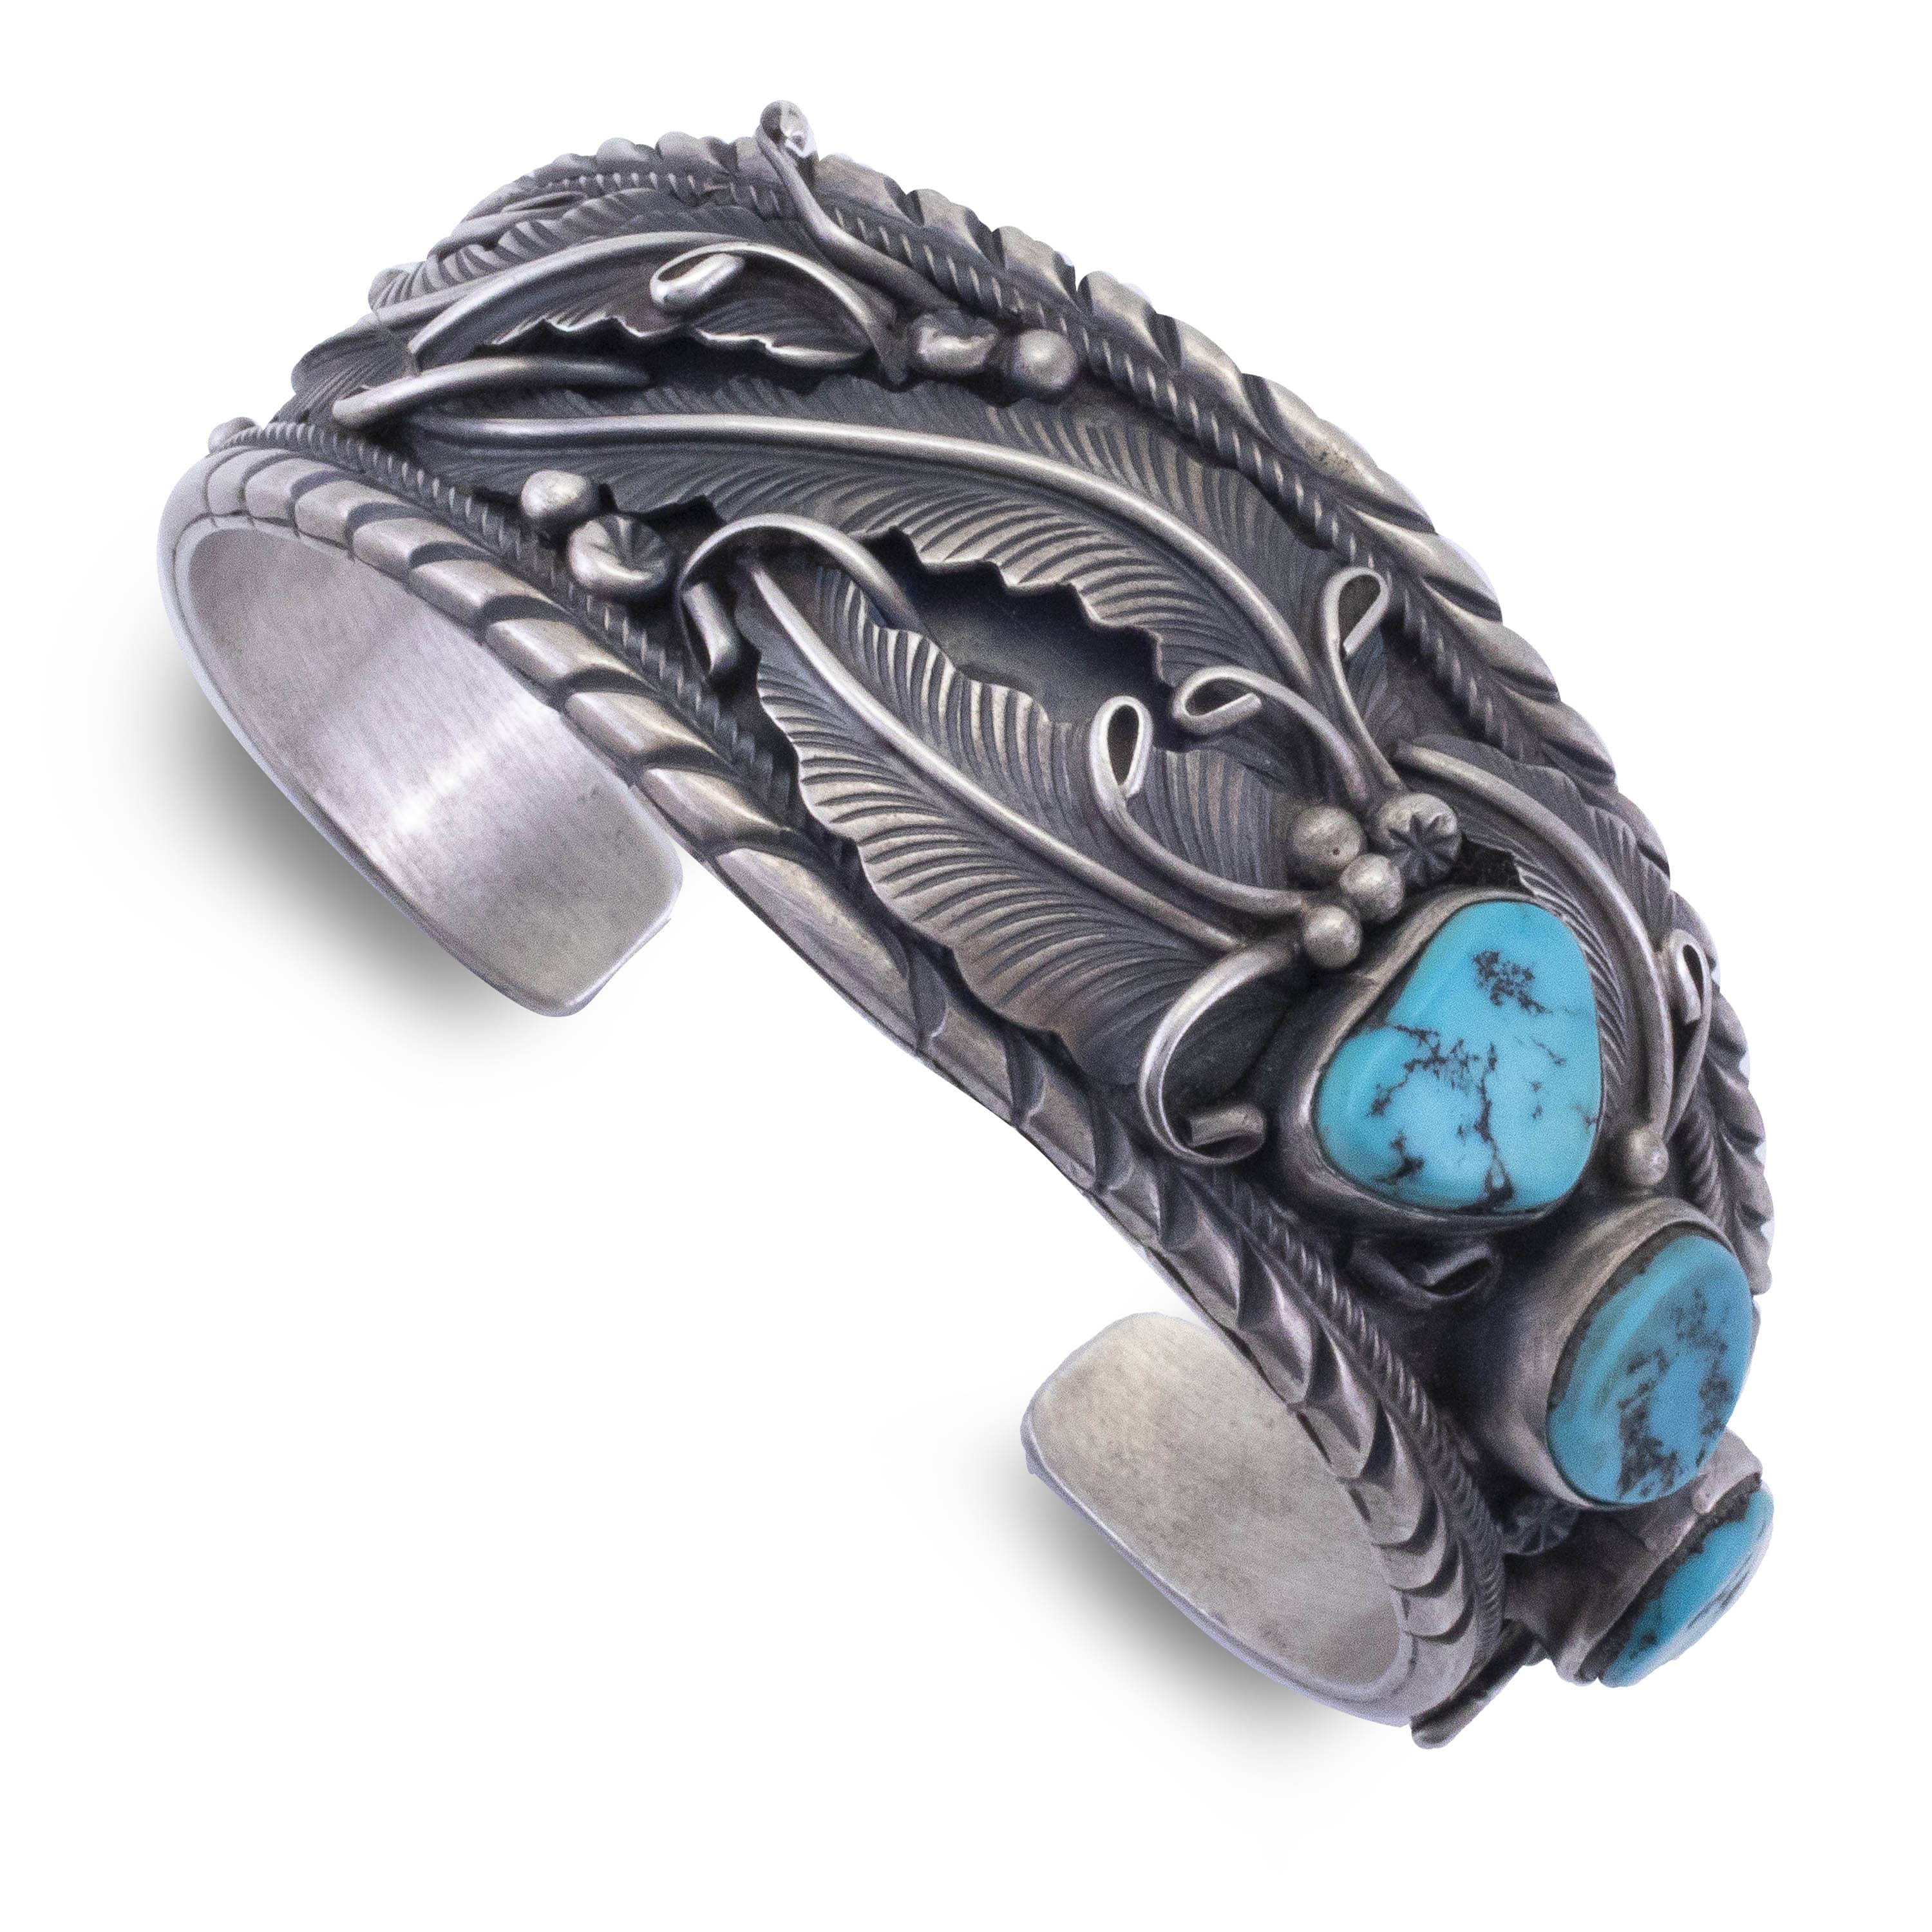 Kalifano Native American Jewelry Marvin Spencer Navajo Kingman Turquoise USA Native American Made 925 Sterling Silver Cuff NAB900.009